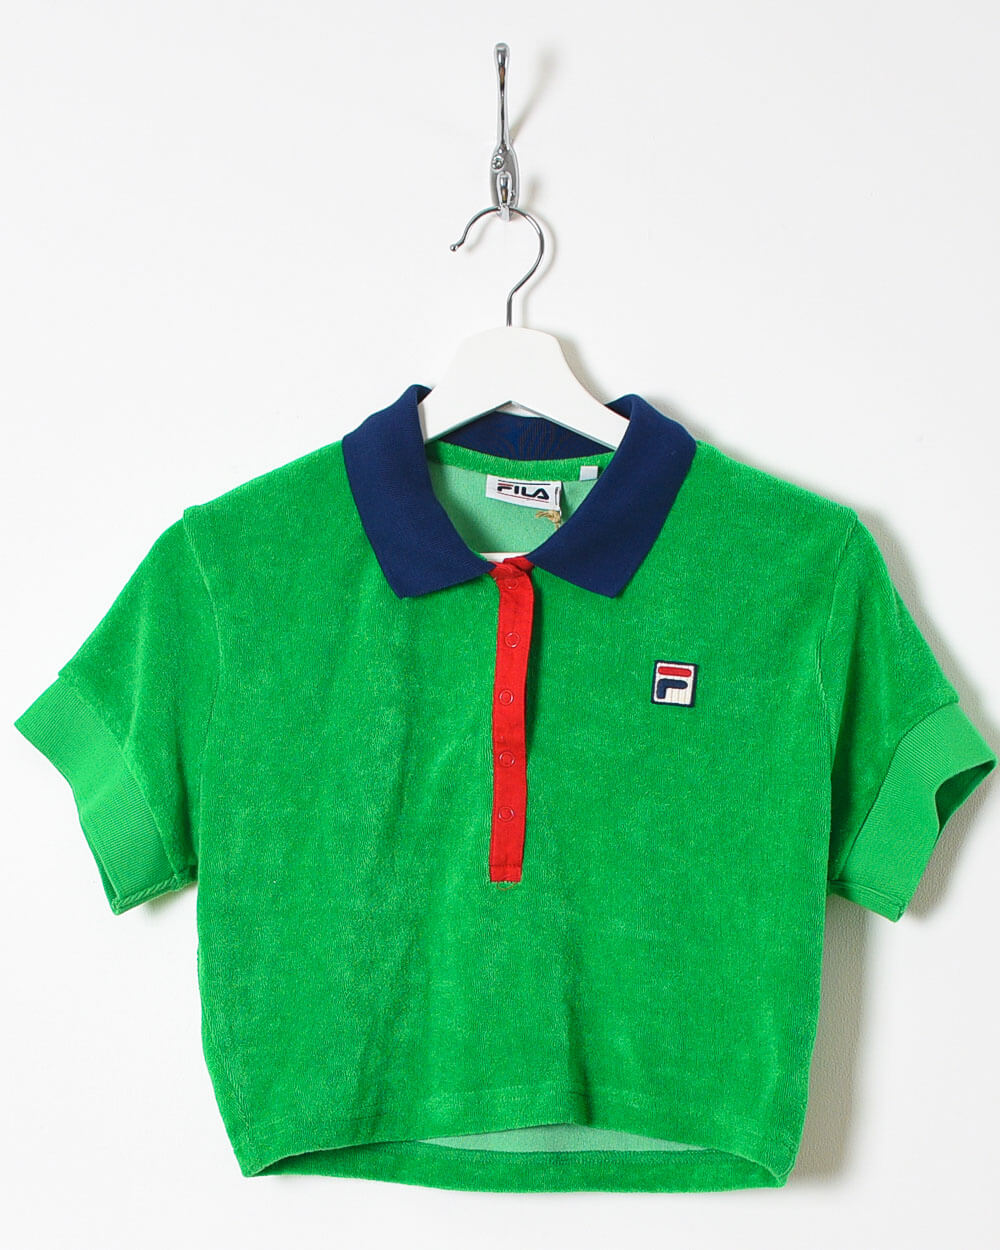 Fila Women's Velour Crop Polo Shirt - Small - Domno Vintage 90s, 80s, 00s Retro and Vintage Clothing 